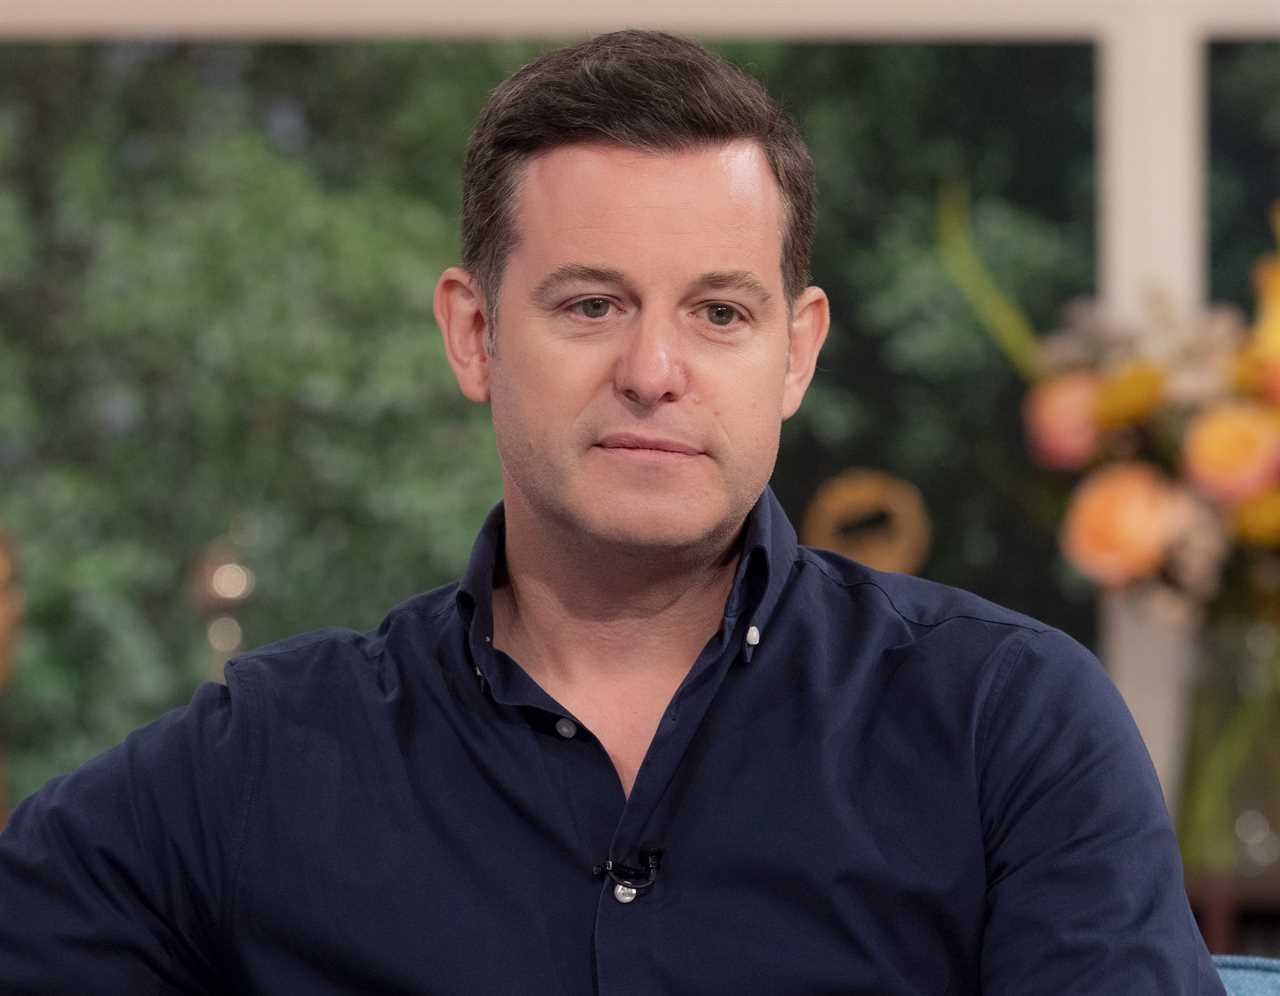 Matt Baker reveals he ‘couldn’t cope’ during the ‘worst period of his life’